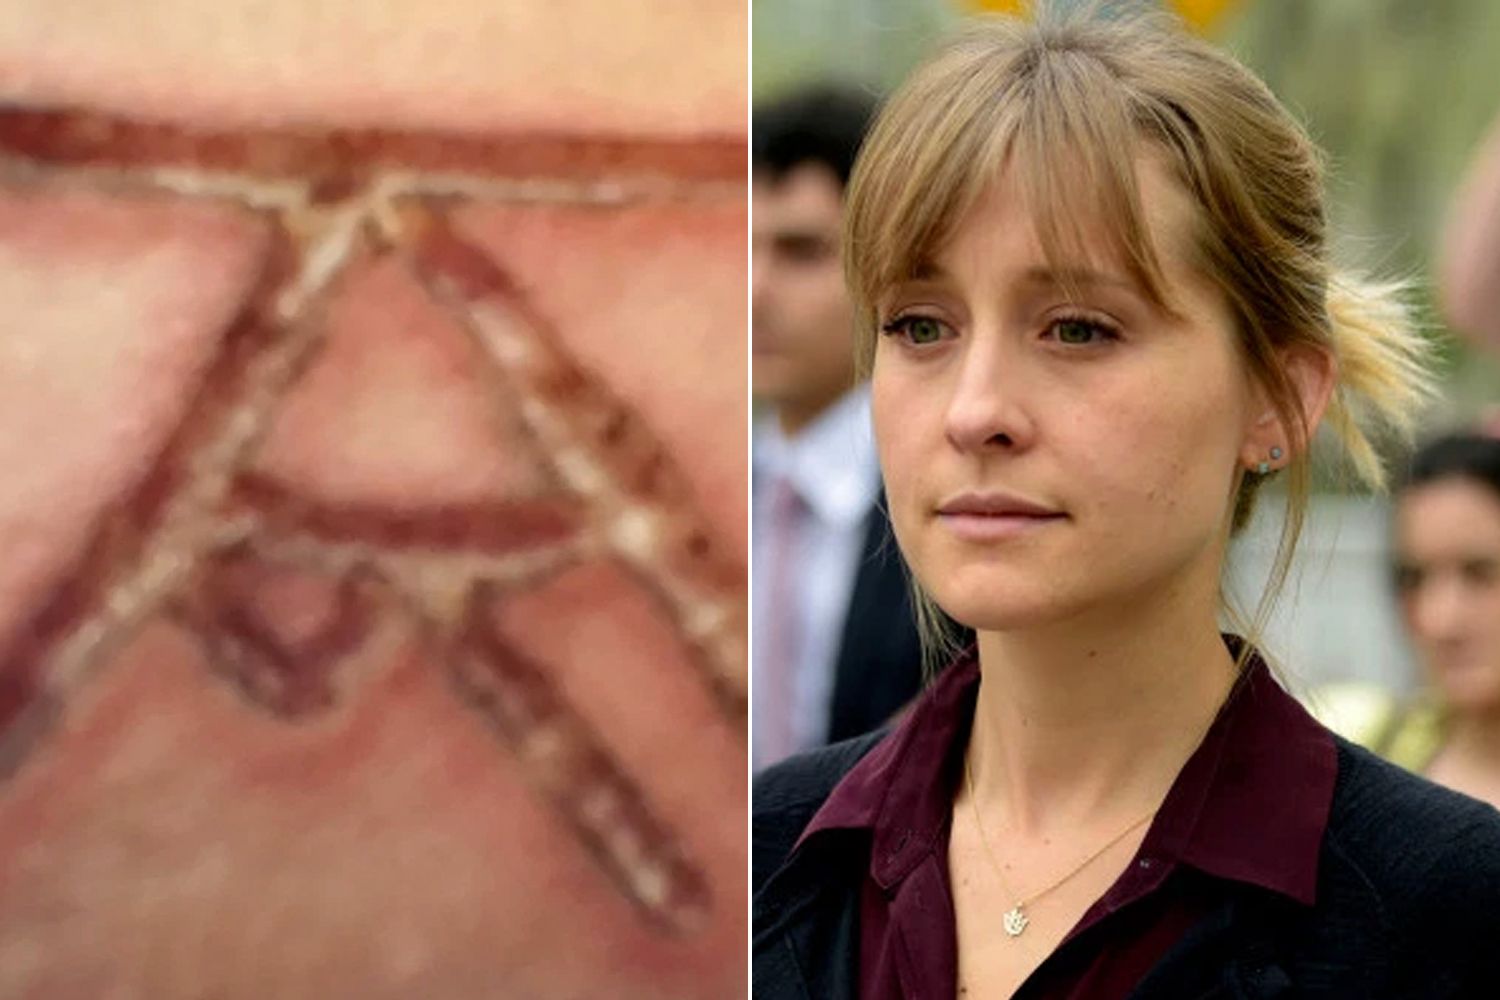 NXIVM trial: When will Allison Mack be sentenced for her crimes? – Film